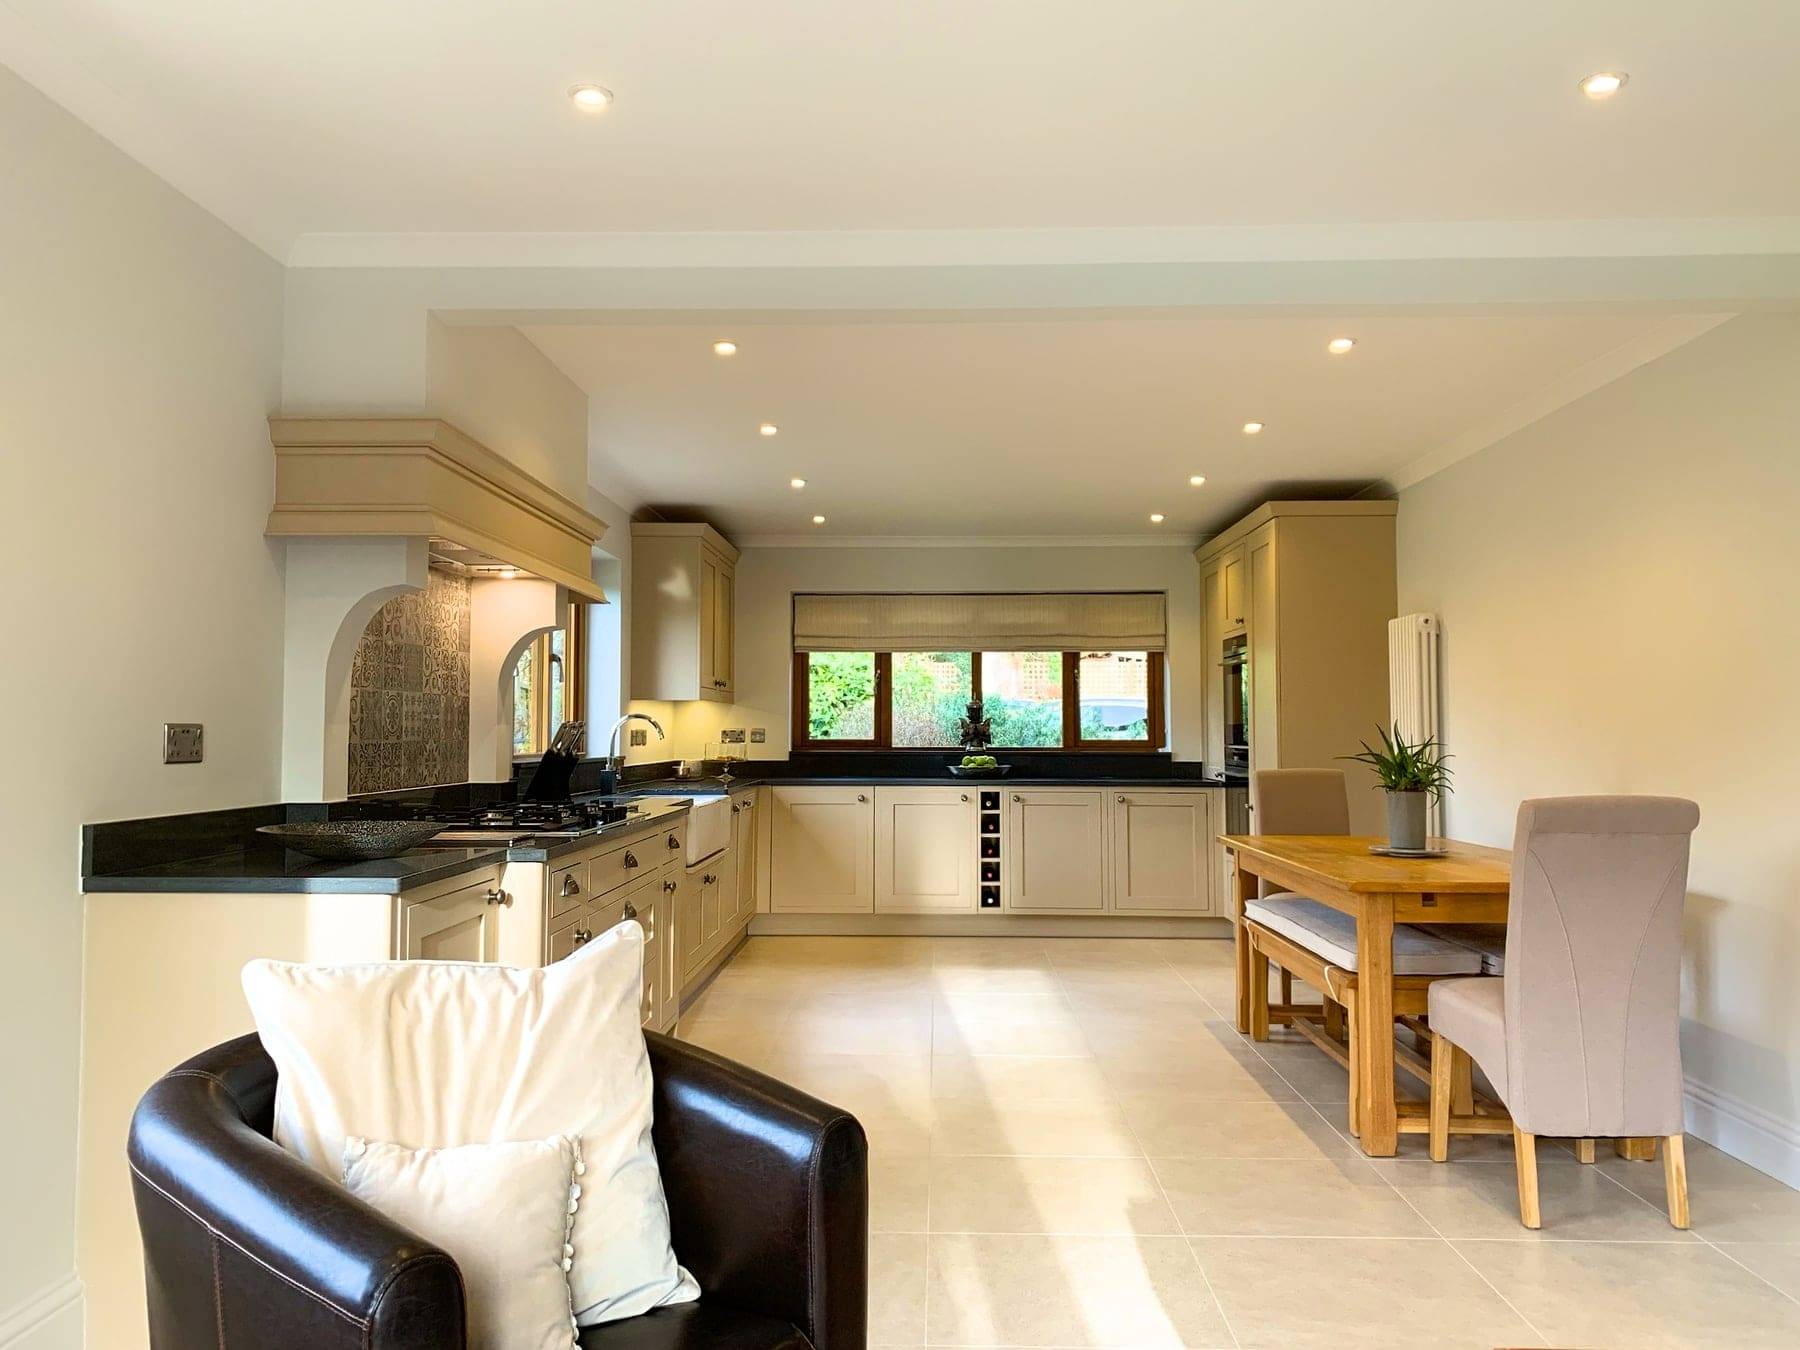 Ud2347 Loughlin Fb 1376 | Utopia Kitchens, Crowthorne